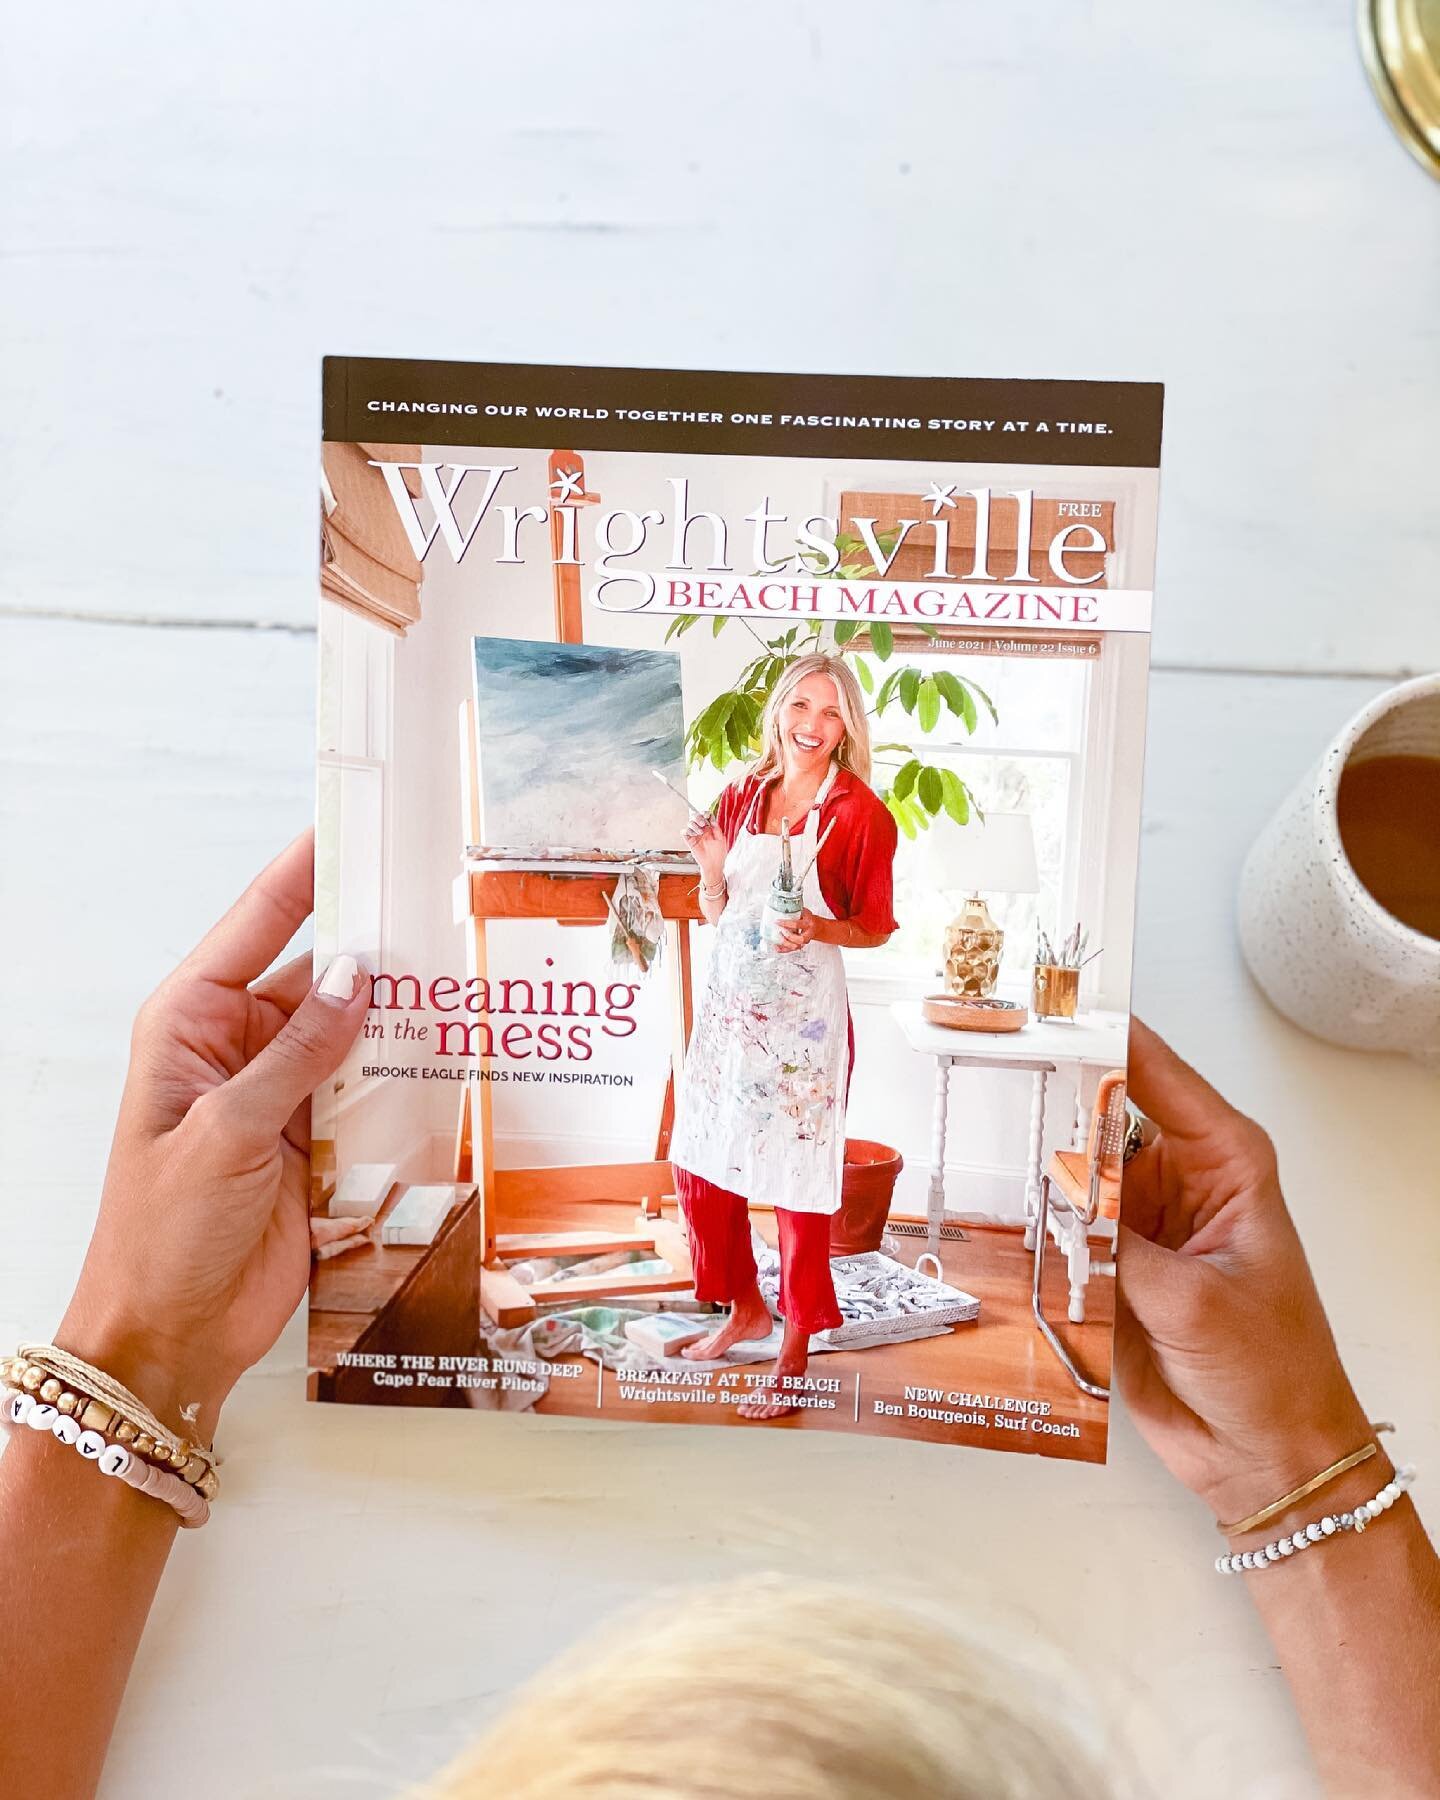 A huge thank you to @wrightsvillebeachmagazine for sharing about me and my inspiration from my best girl in the June issue...AND surprising me with the cover! 😍 What in the world. Walking into the grocery store and seeing my face in the stand was pr